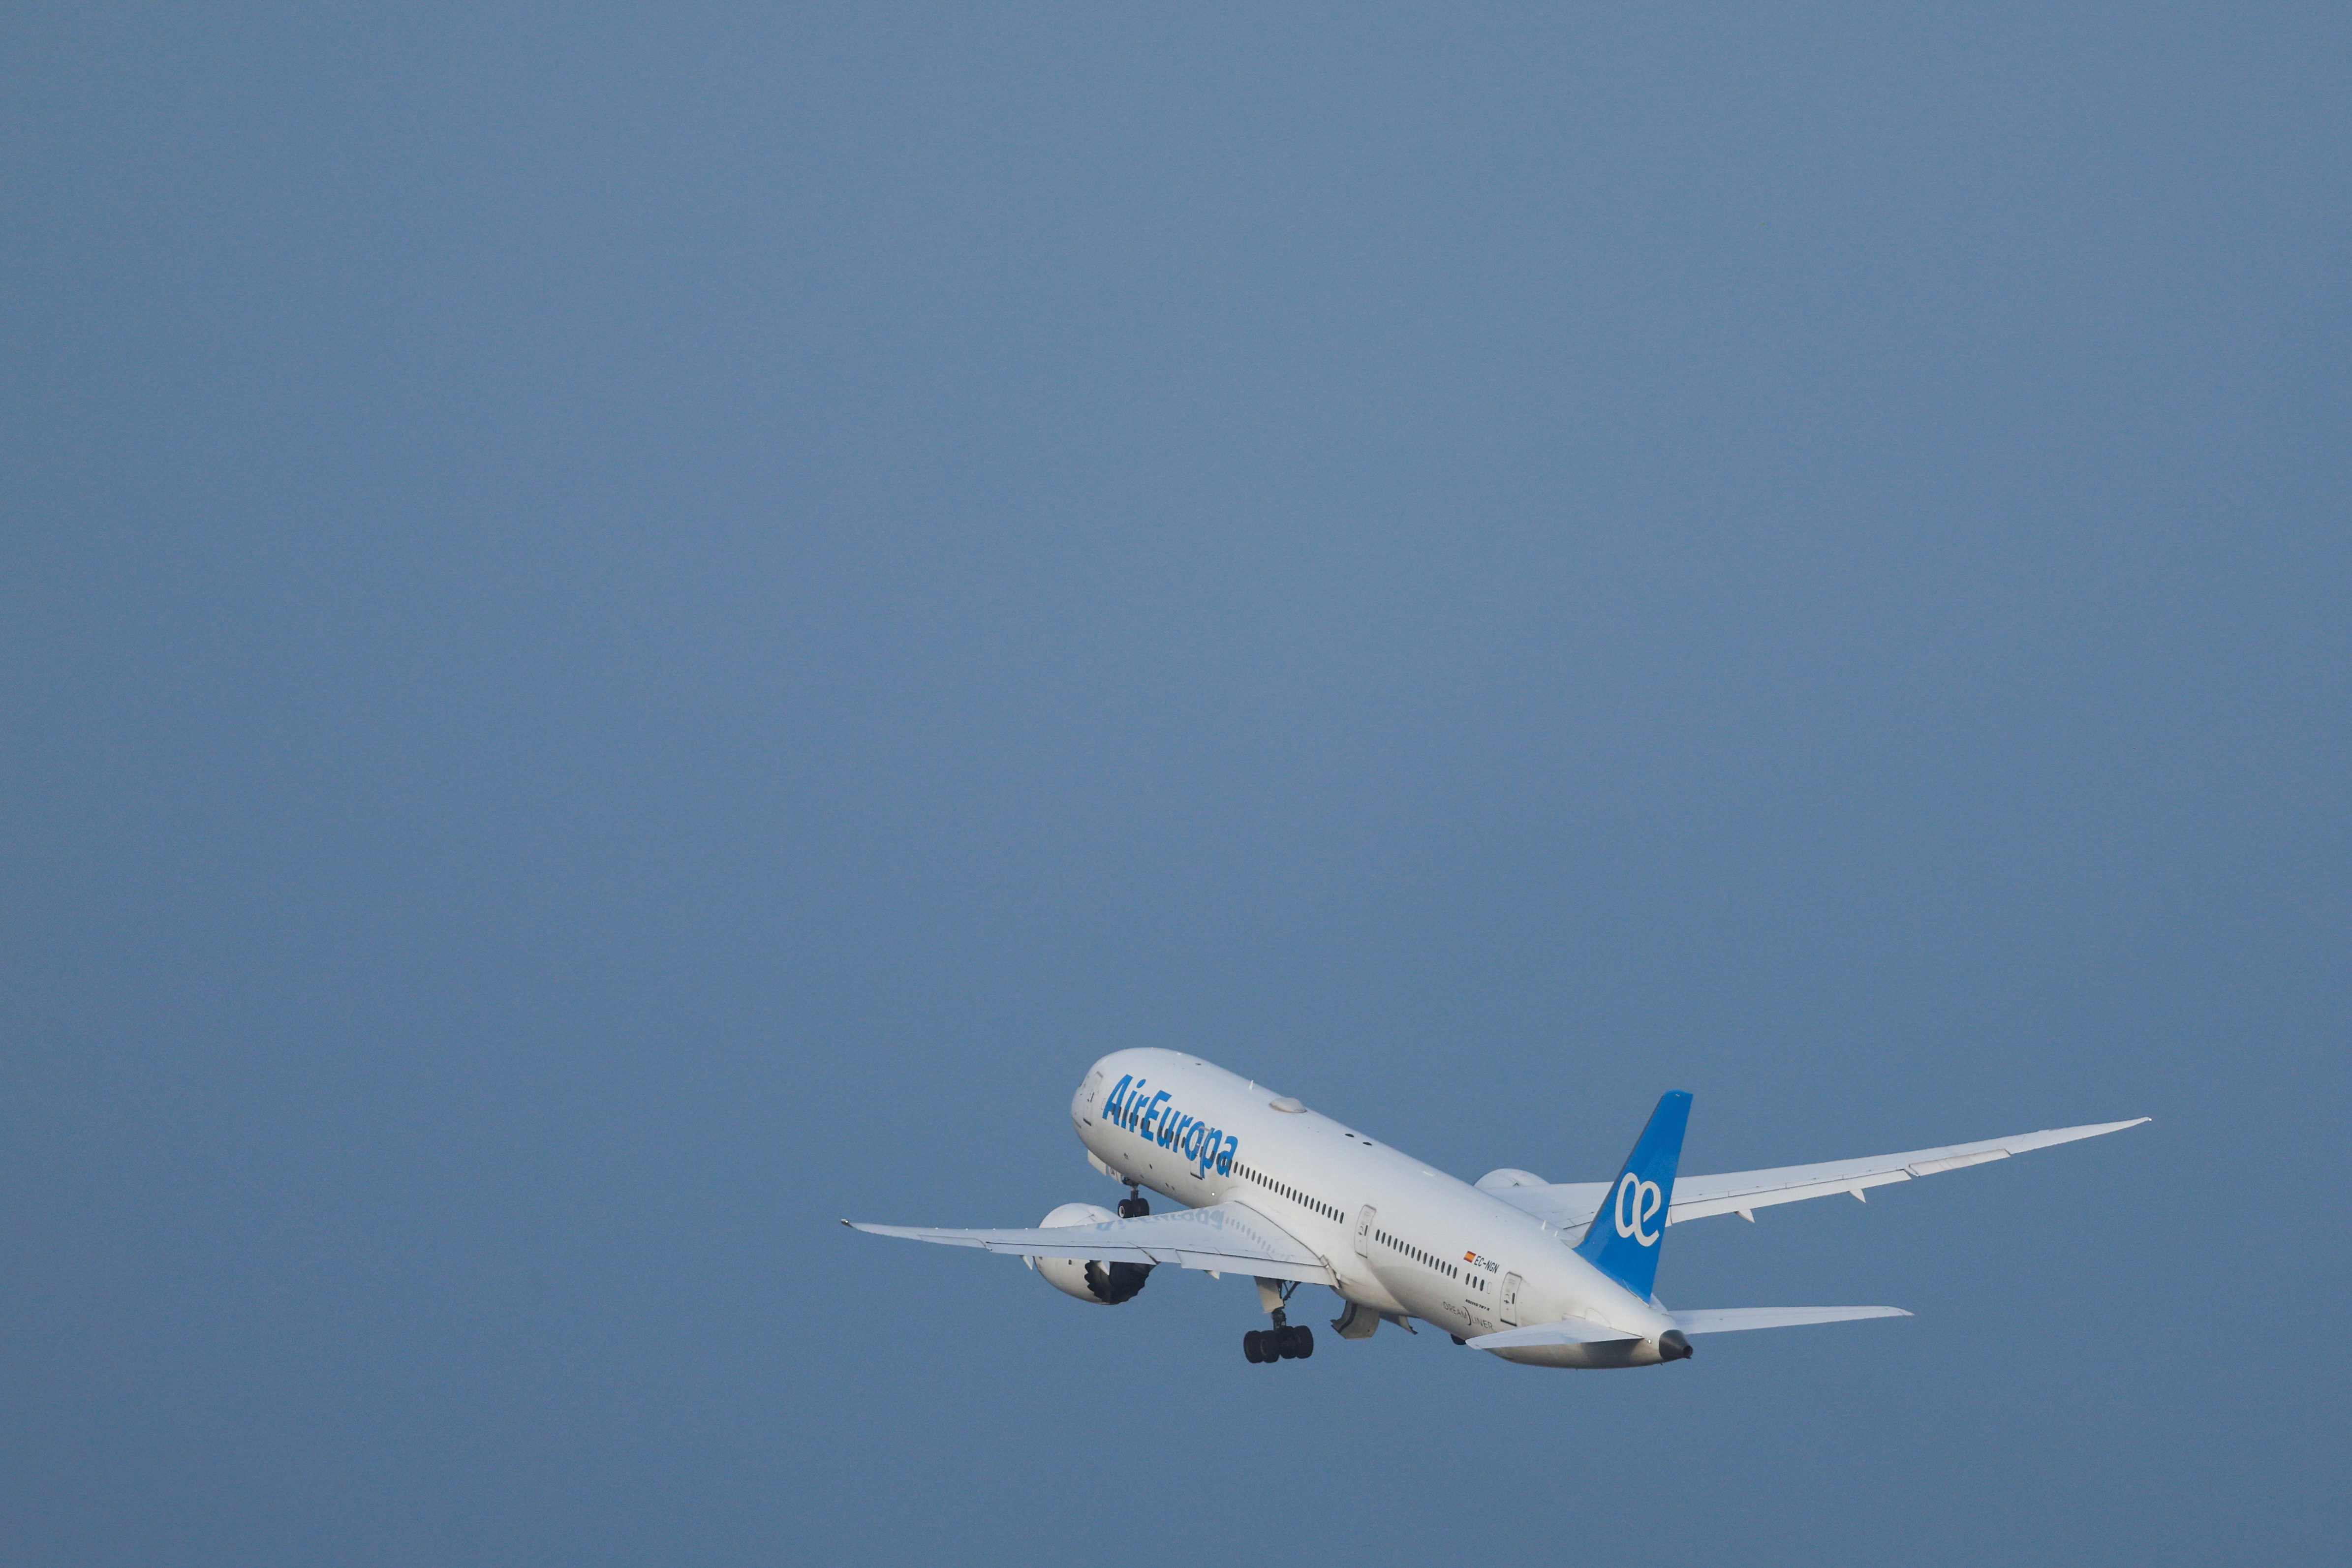 A Boeing 787-9 Dreamliner of the Air Europa company takes off from Gran Canaria airport